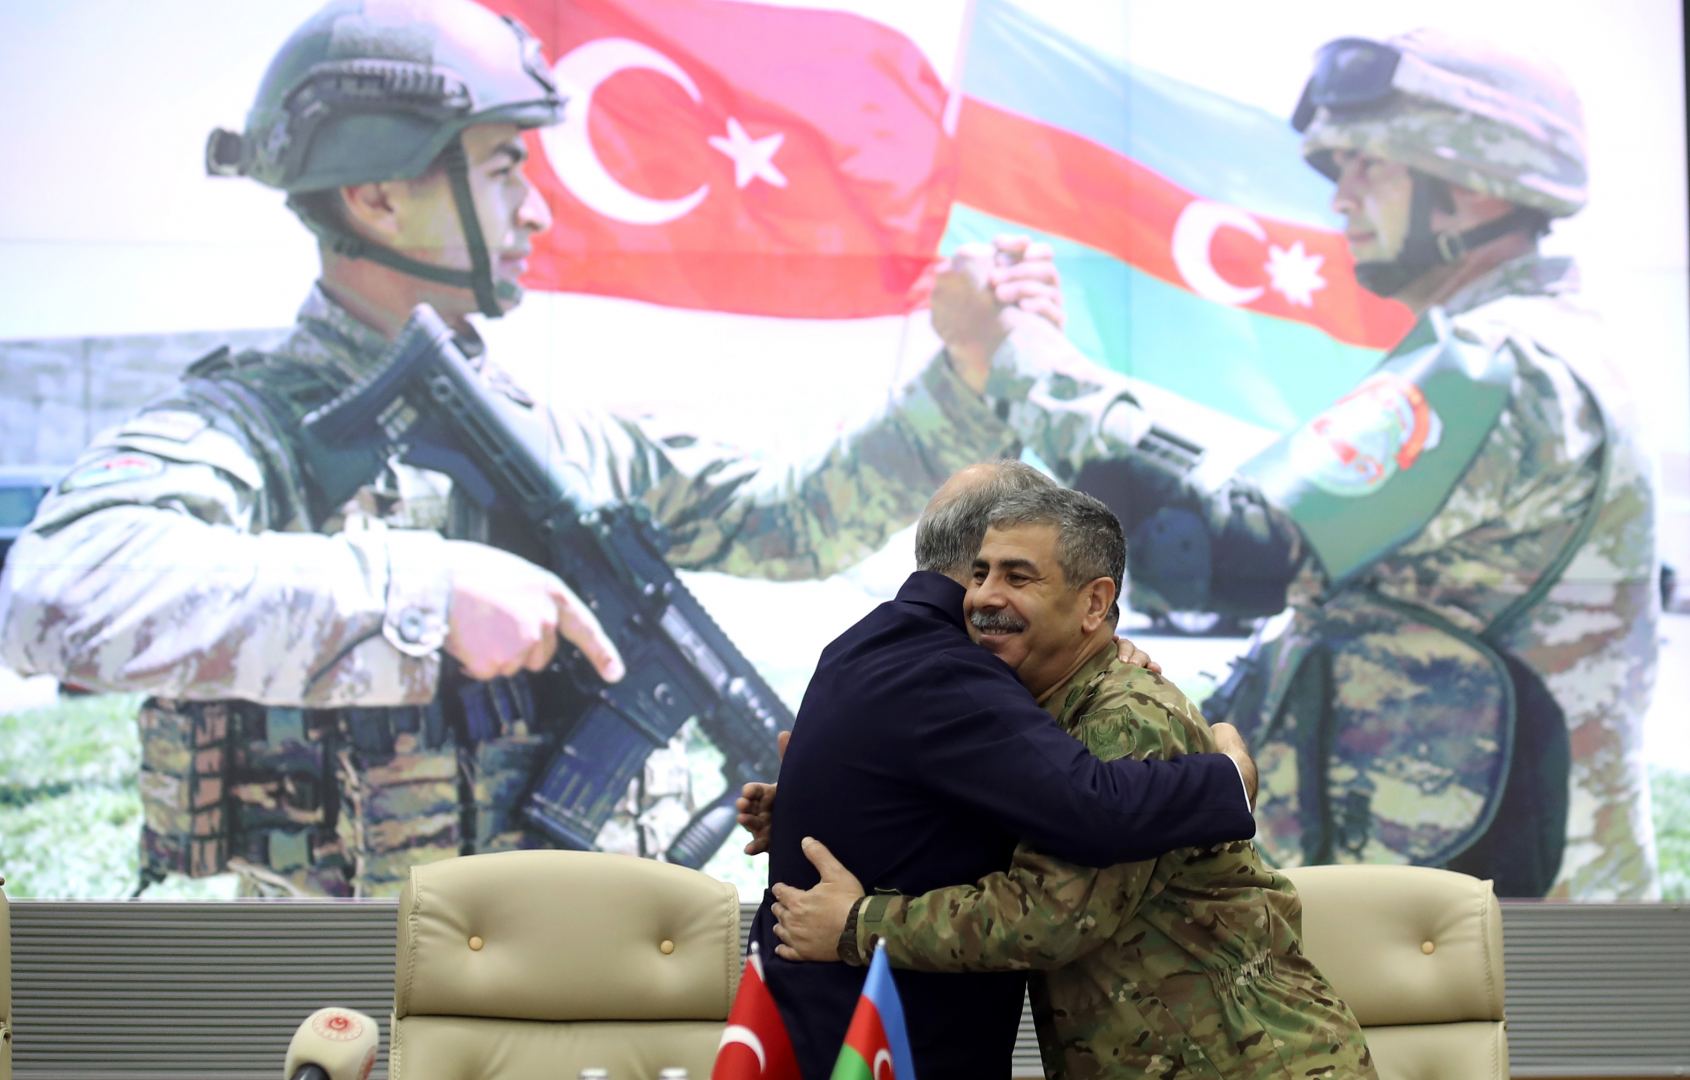 Azerbaijani army showed its power to entire world - Turkish defense minister